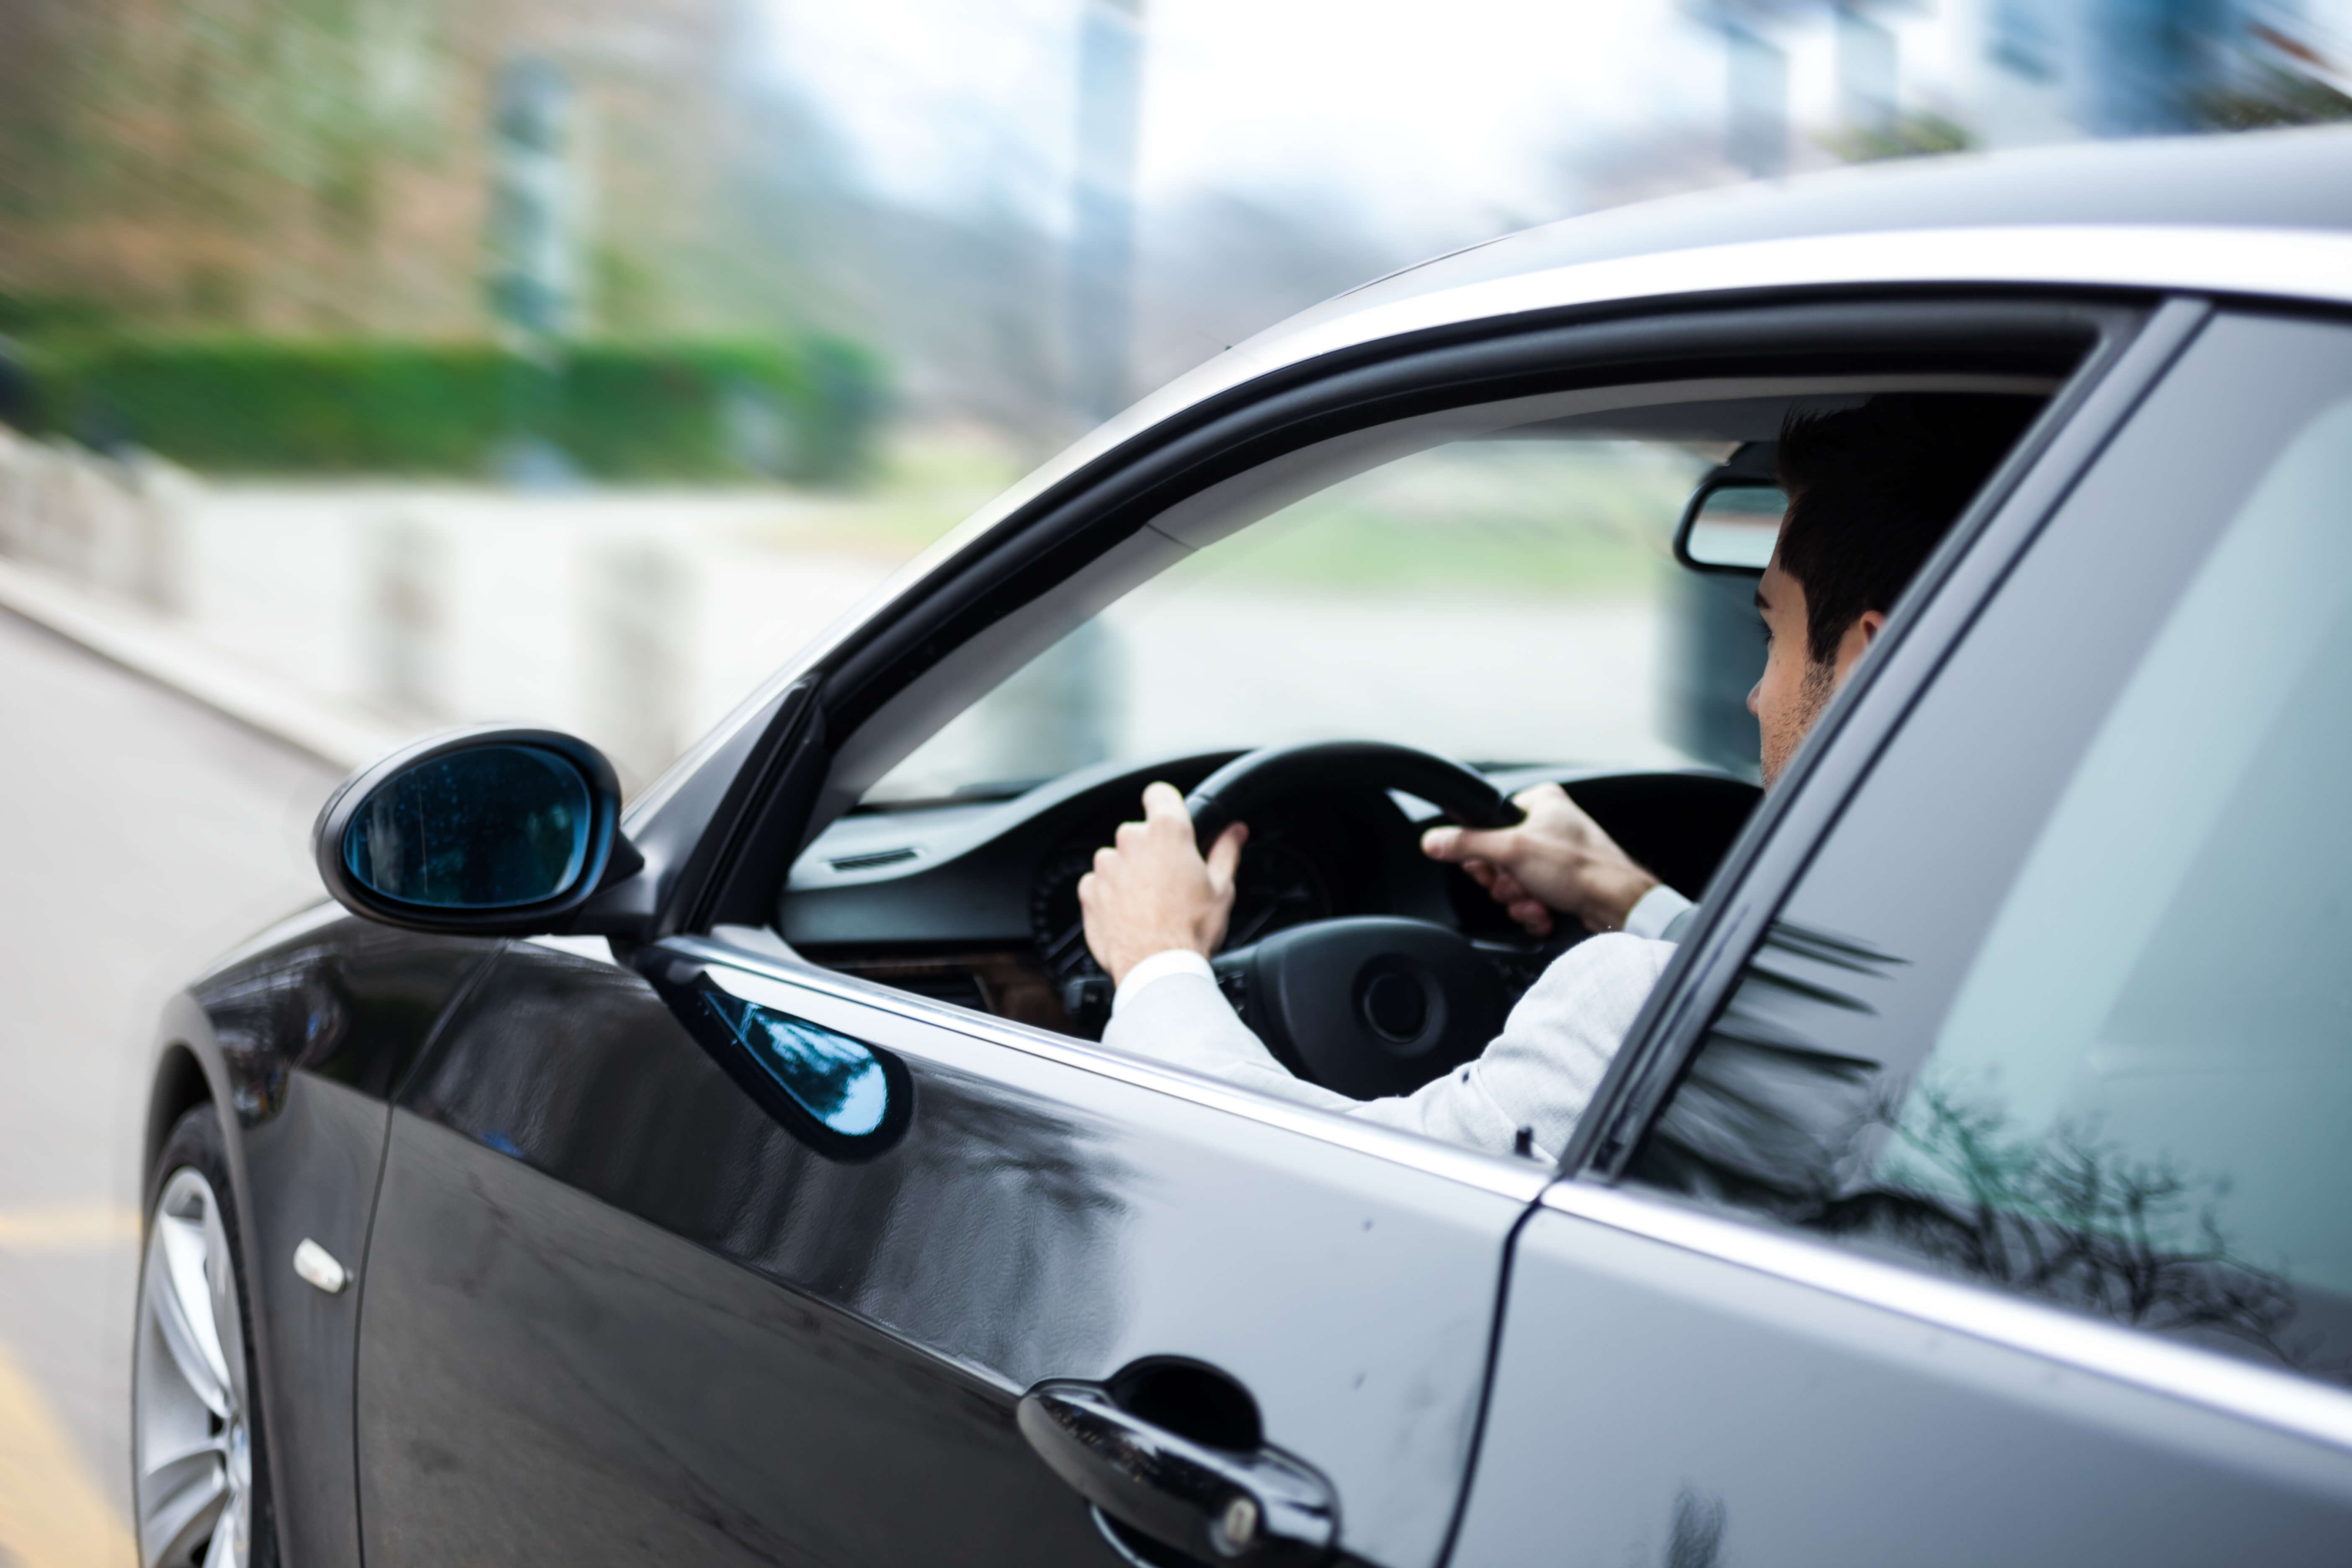 Man driving - how to obtain an occupational license